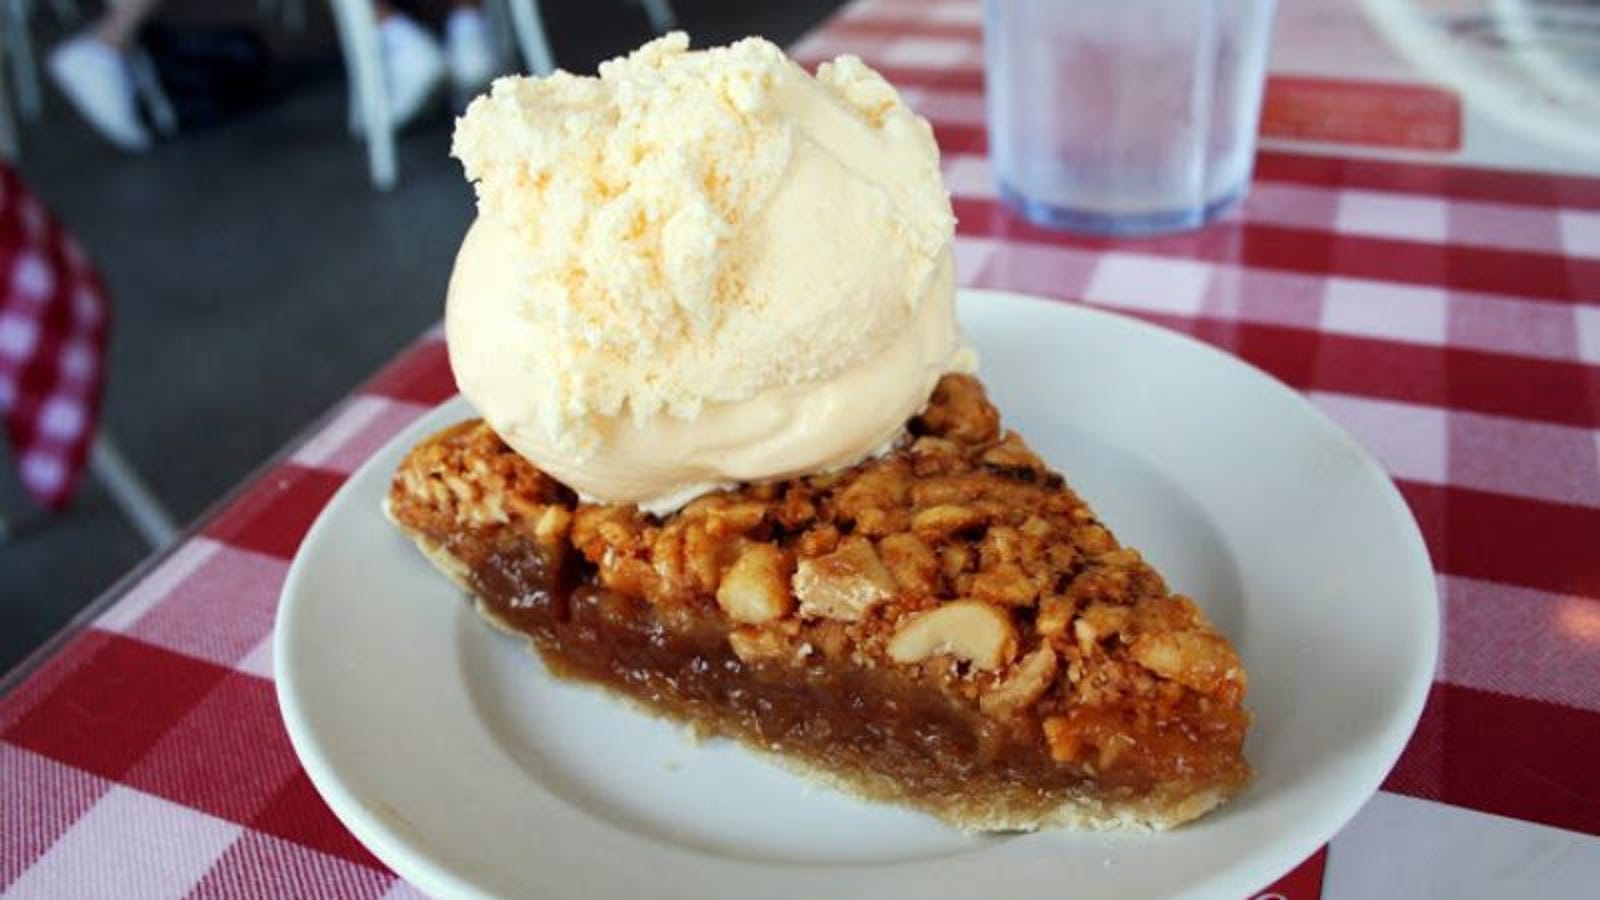 Peanut pie and the sweet, crunchy memories of a Southern Virginia childhood